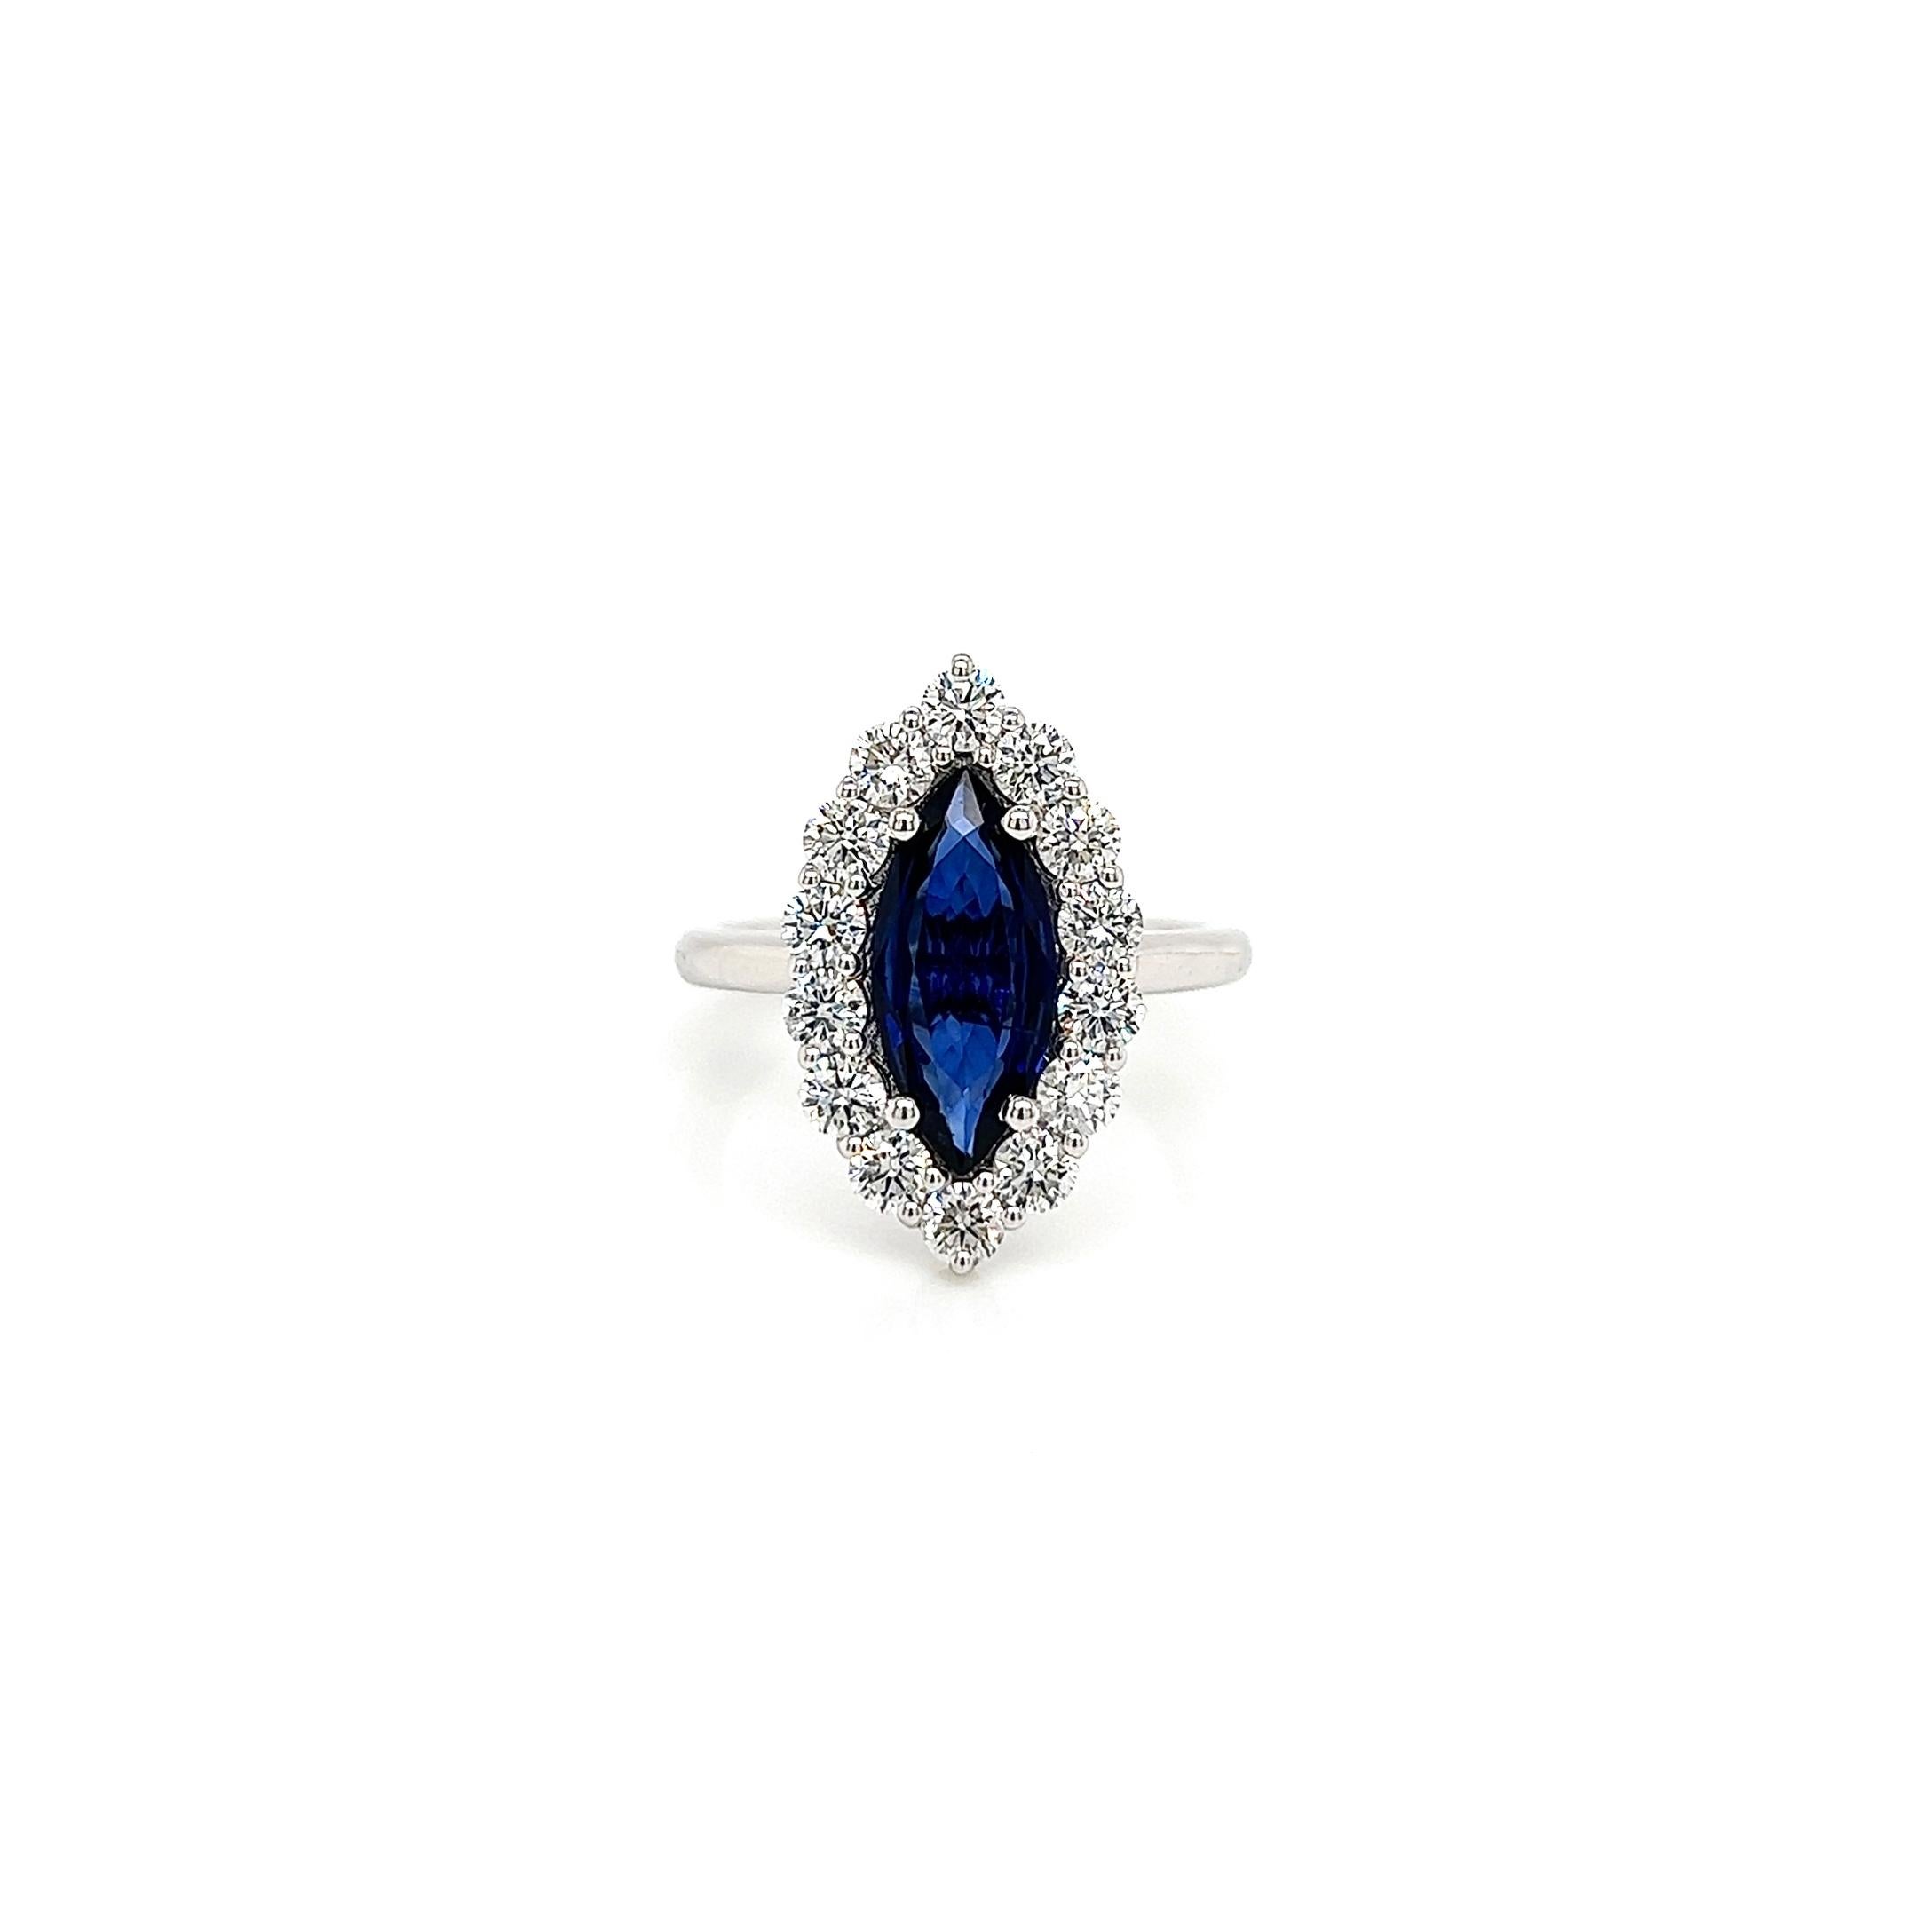 2.98 Total Carat Sapphire Diamond Ladies Ring

-Metal Type: 14K White Gold
-1.85 Carat Marquise Shaped Blue Sapphire
-1.13 Carat Round Side Diamonds 
-Size 6.5

Made in New York City.